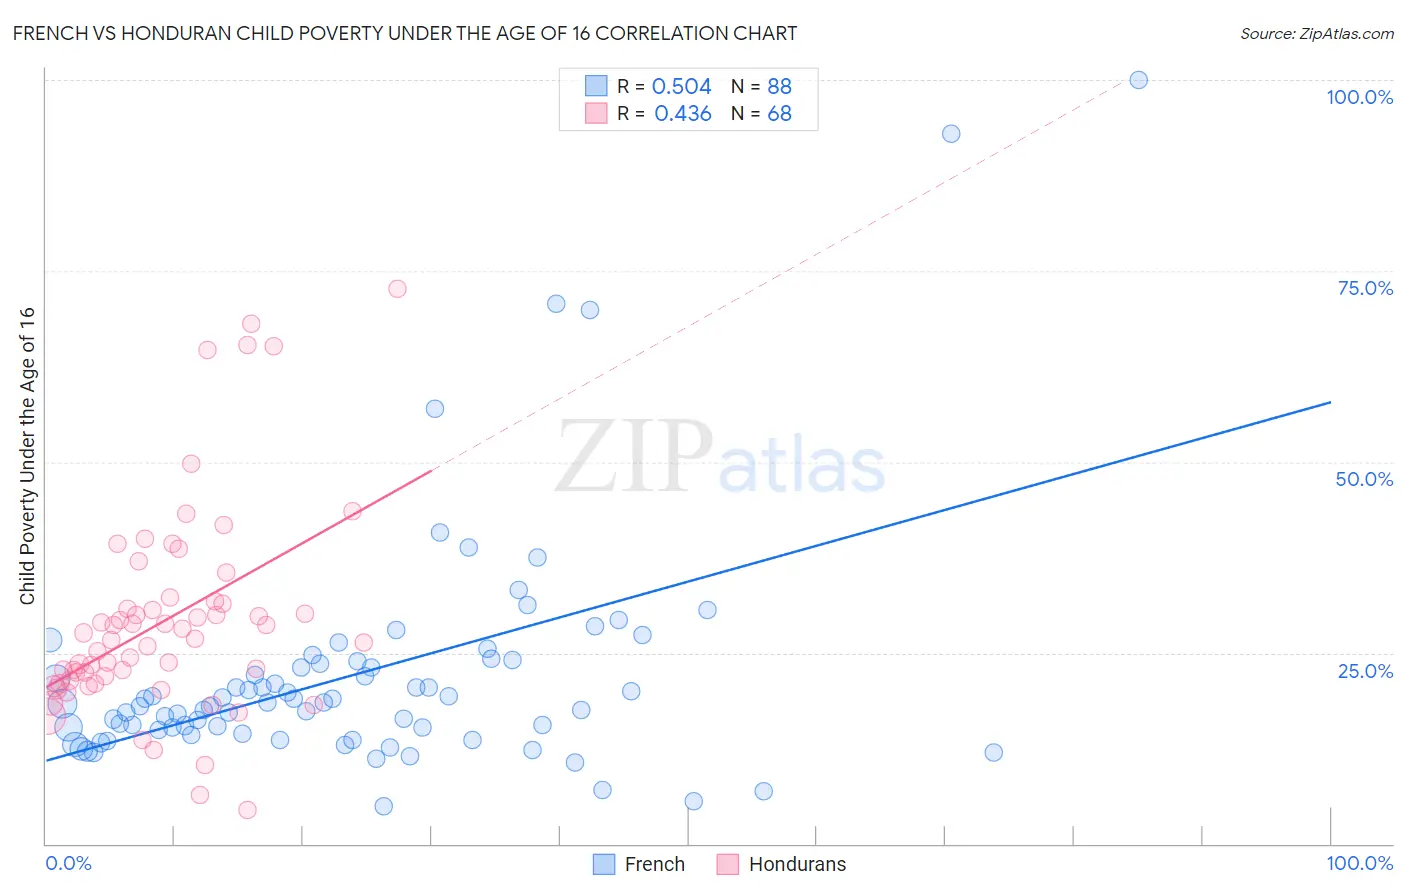 French vs Honduran Child Poverty Under the Age of 16